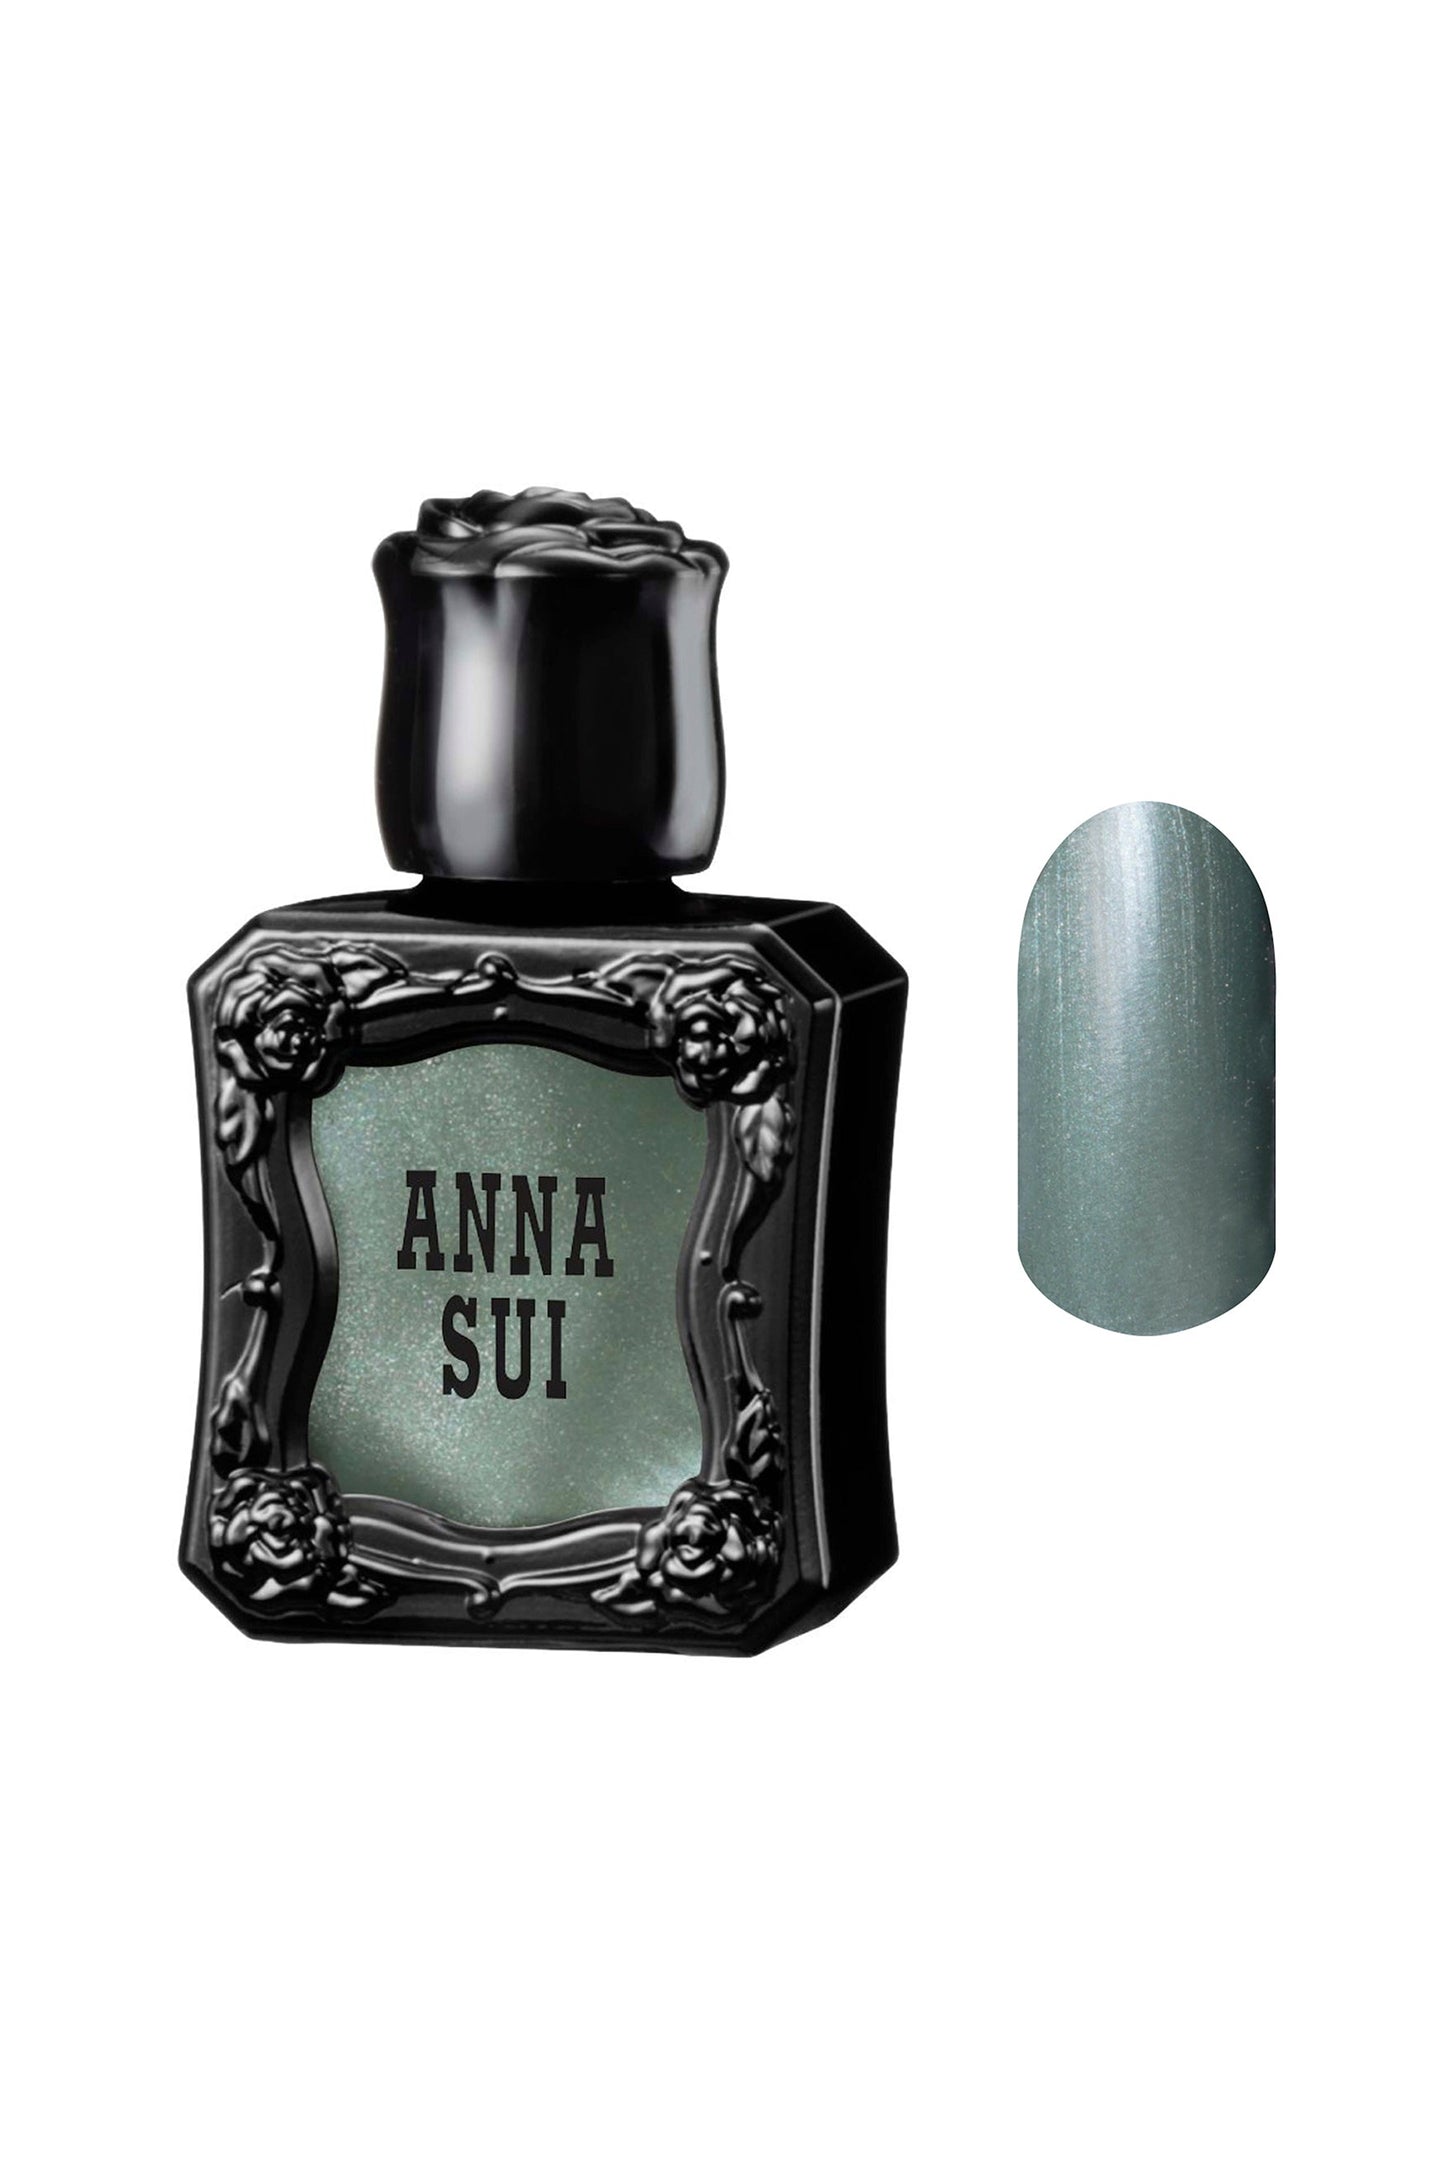 BAMBOO GREEN Nail Polish bottle raised rose pattern, Anna Sui in black over nail colors in front